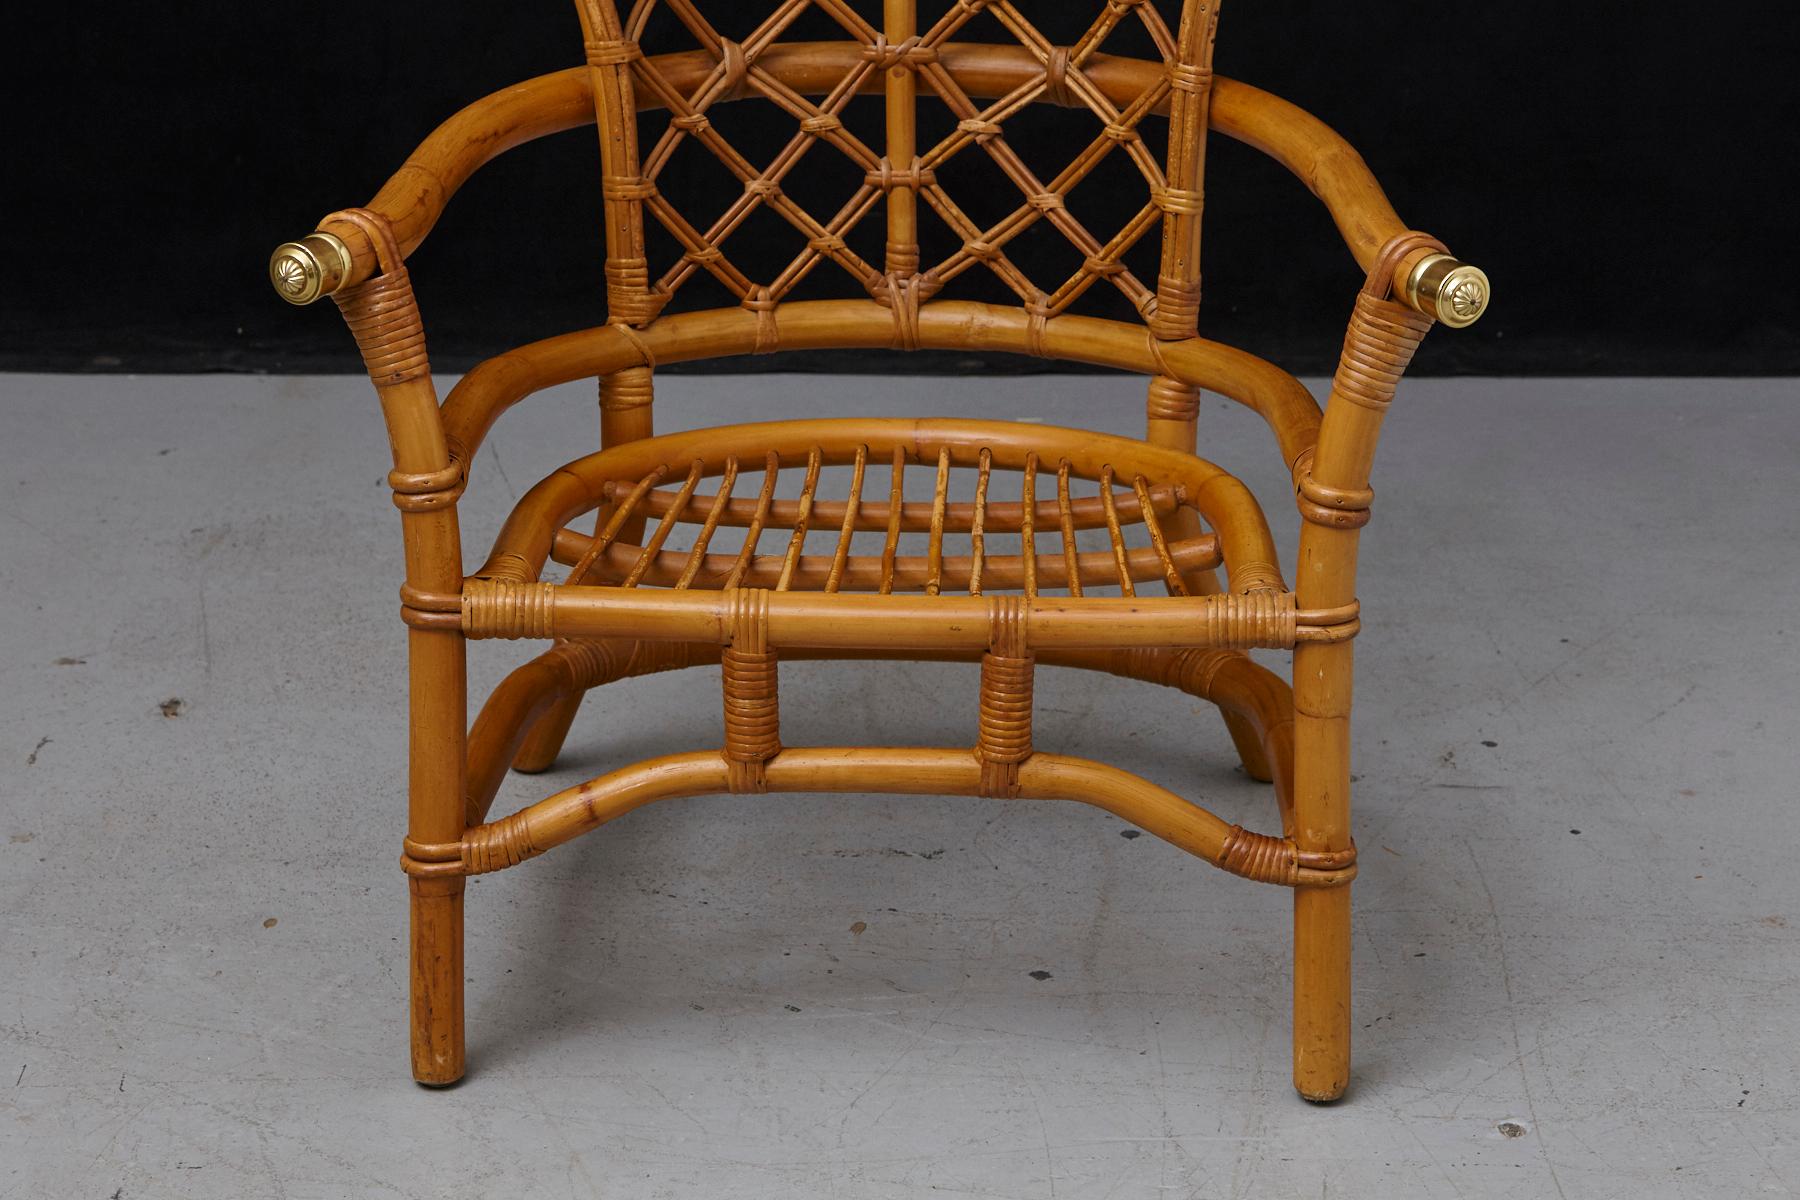 Lovely Hollywood Regency rattan armchair with a high back fan style and brass elements at the end of the armrests, circa 1960s.
The chair is in good solid condition, one of the rattan sticks in the seat area has a clean break, which has been